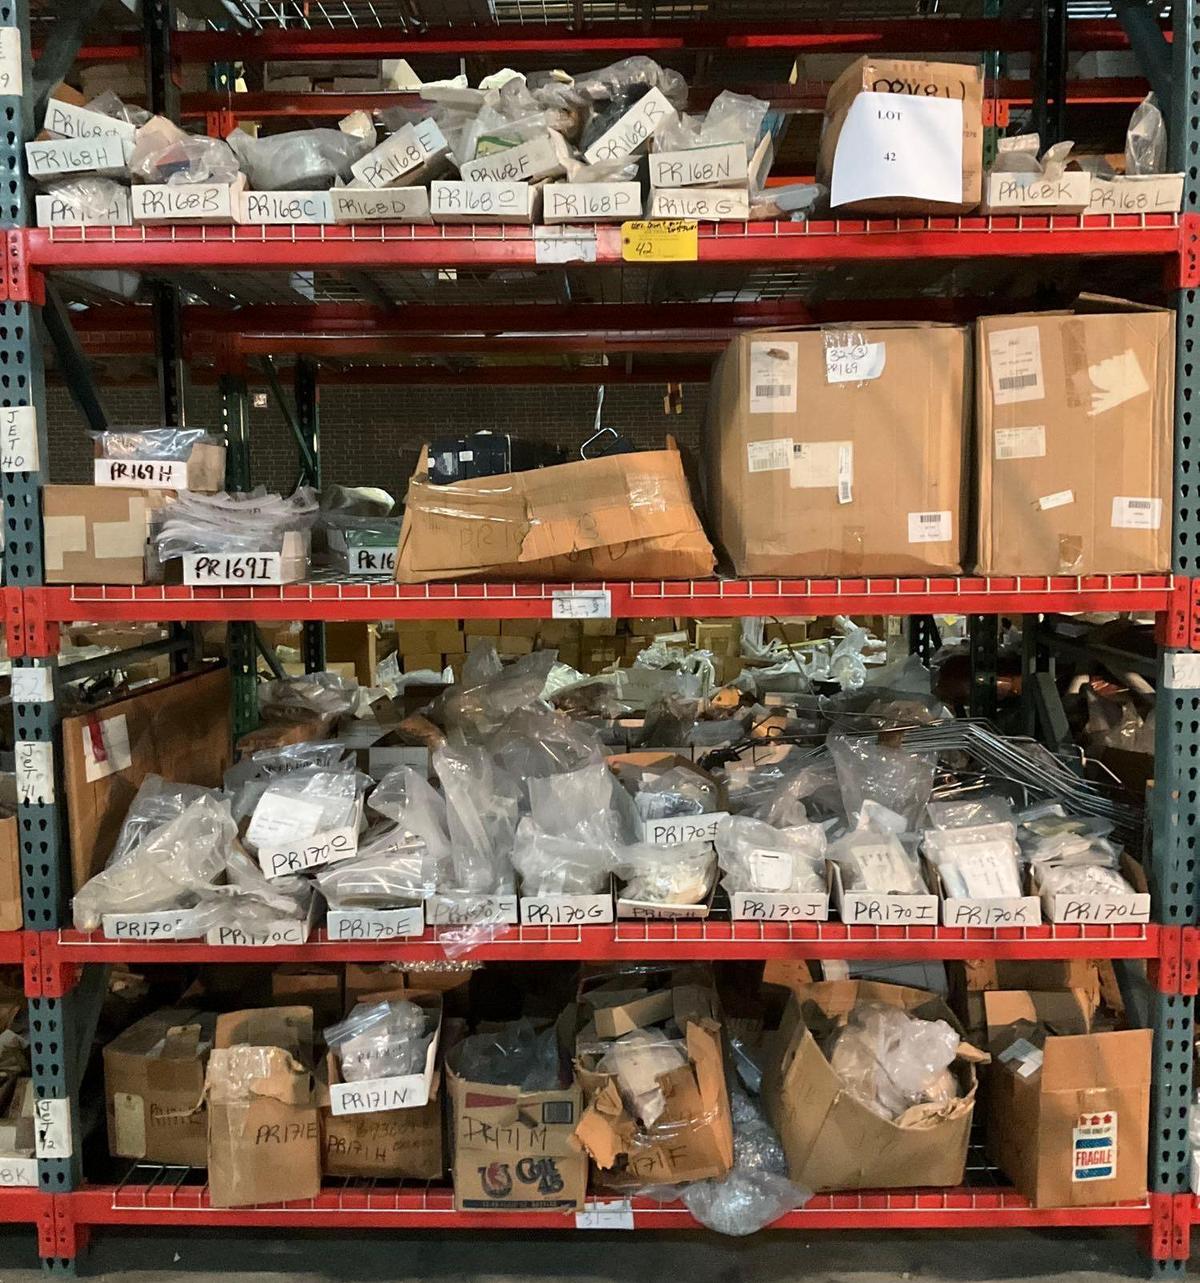 2447 LINE ITEMS. 93% OF THIS LOT IS NEW EXPENDABLES, CONSUMABLES, ELECTRICAL & HARDWARE (BAC, MS,